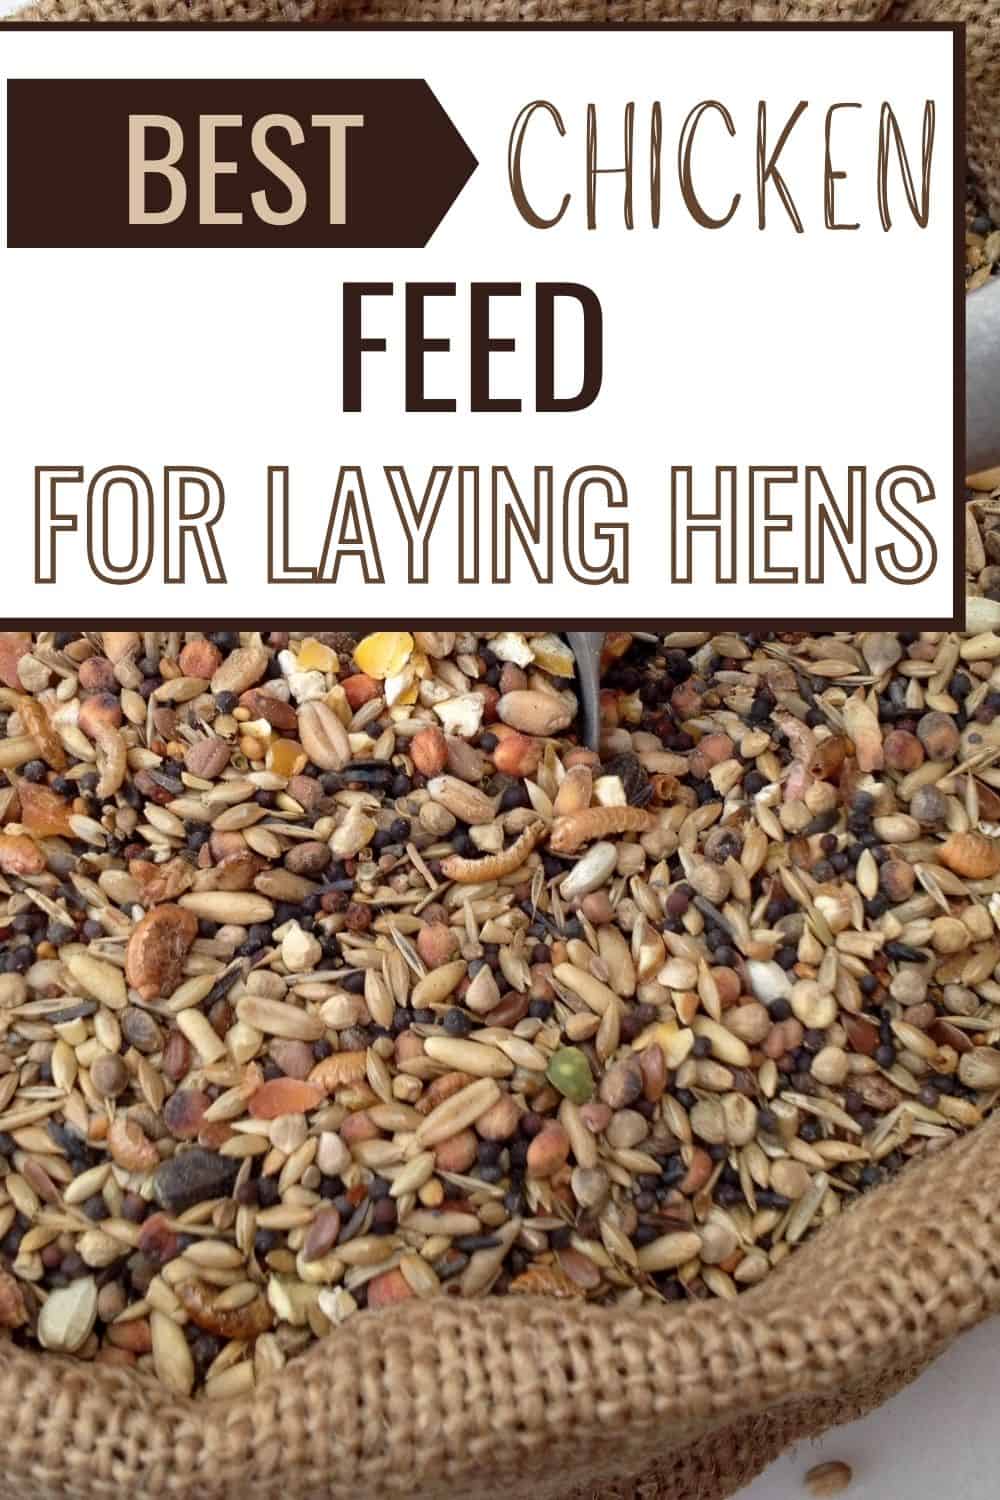 Best chicken feed for laying hens